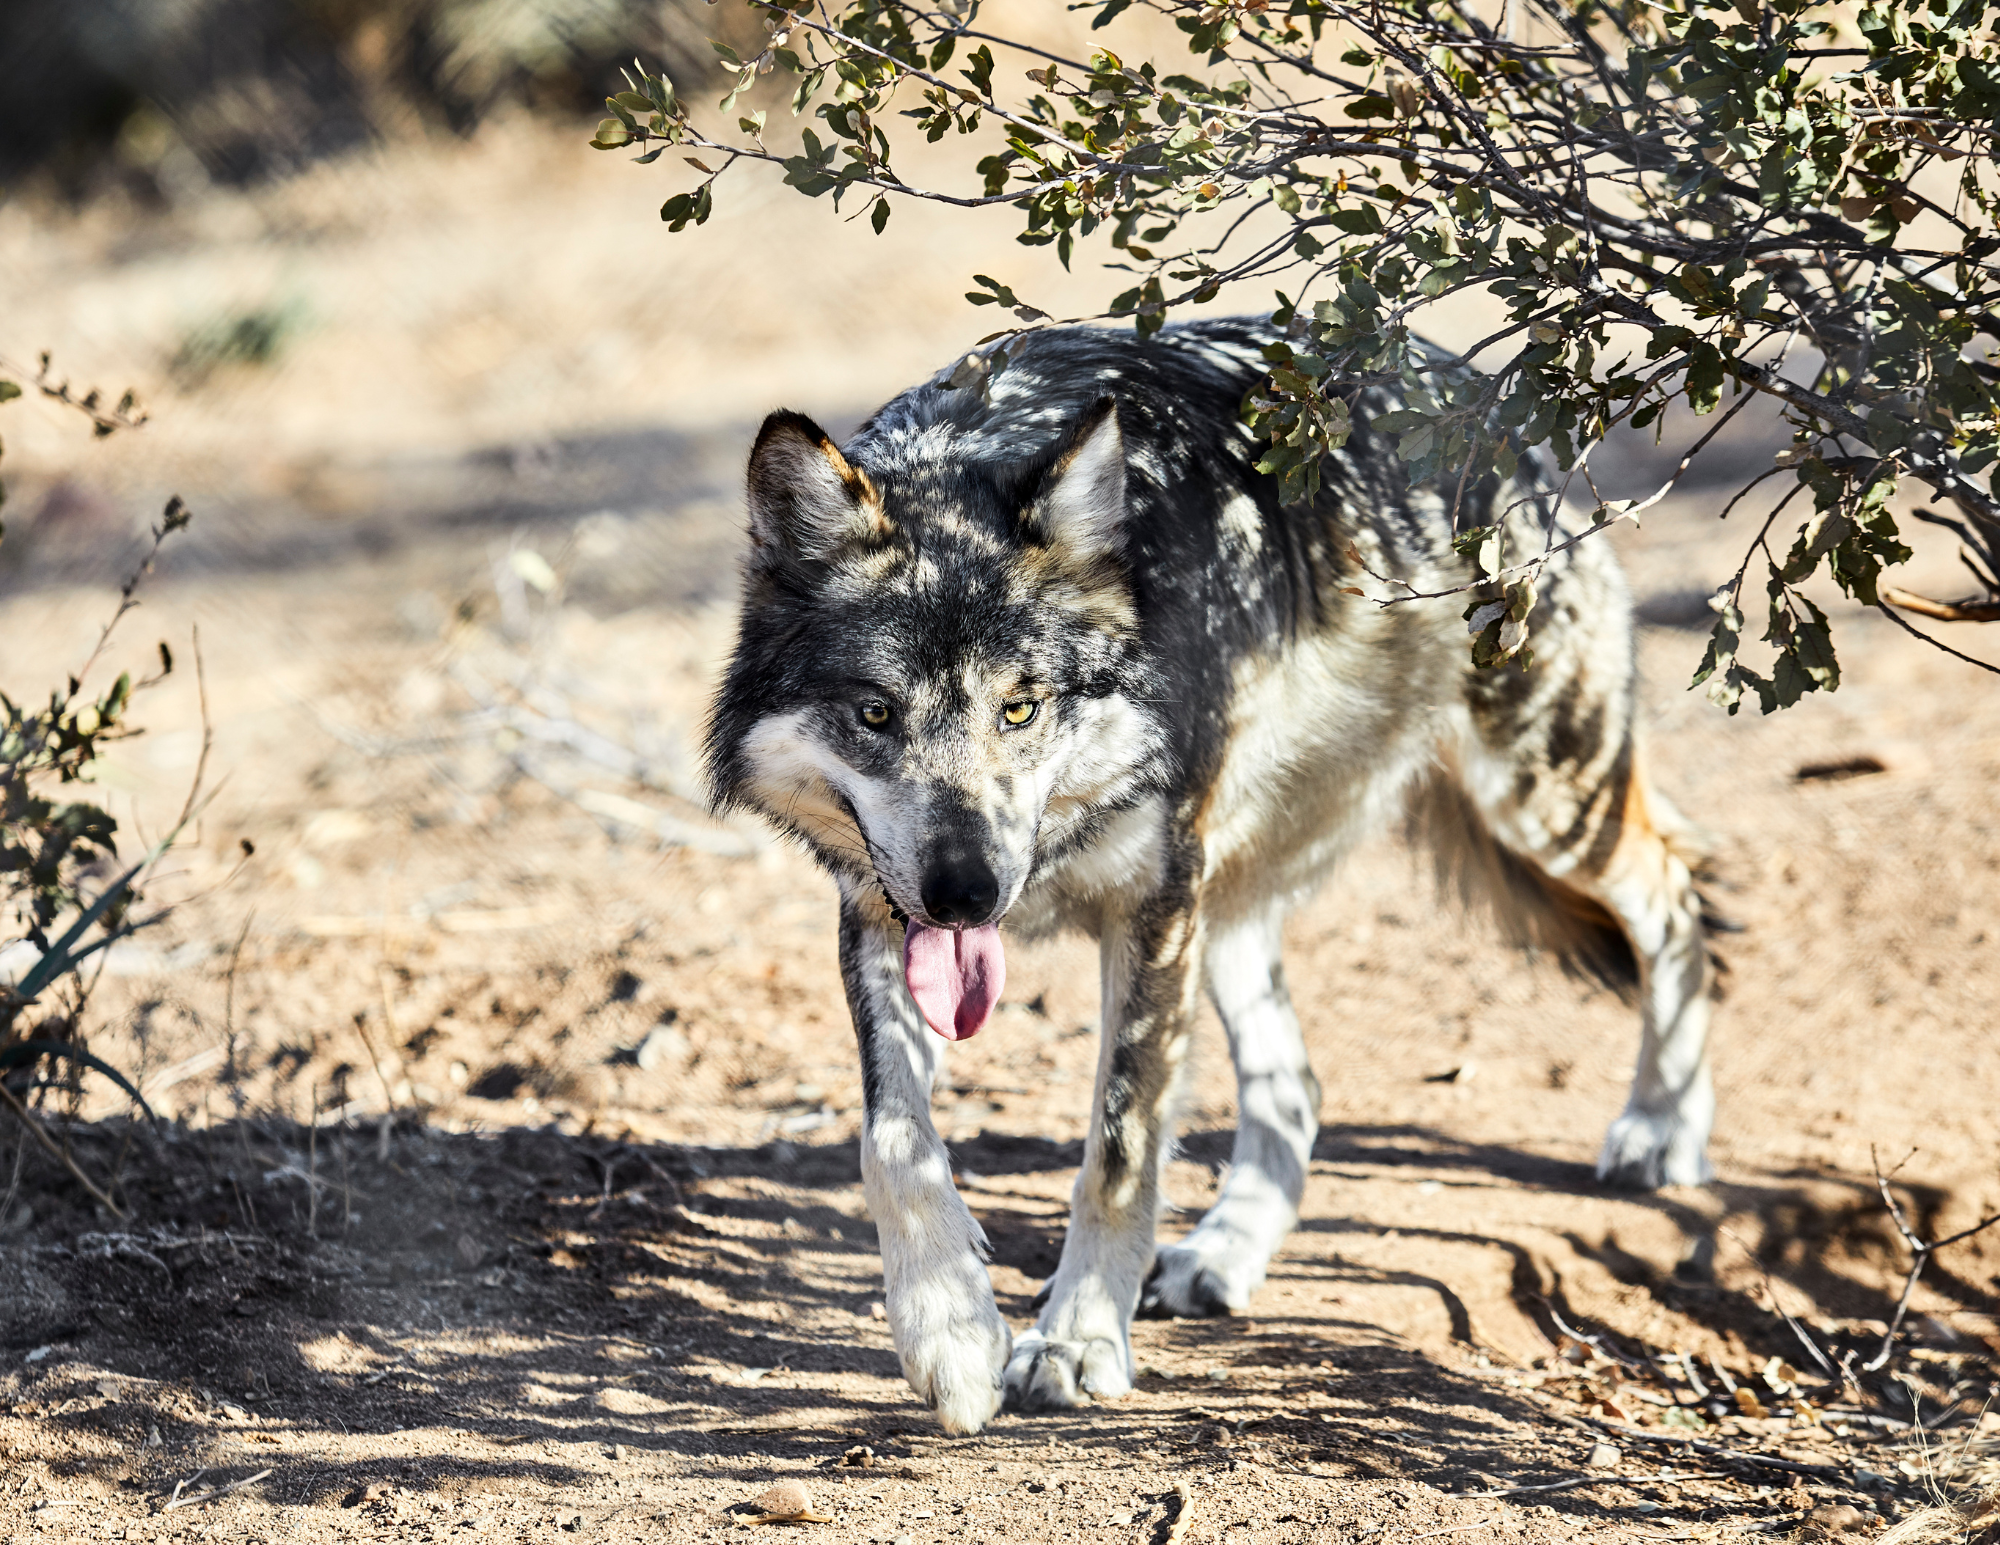 Conservation Groups Celebrate Record Mexican Gray Wolf Population But Caution Against Using Numbers Alone To Measure Recovery